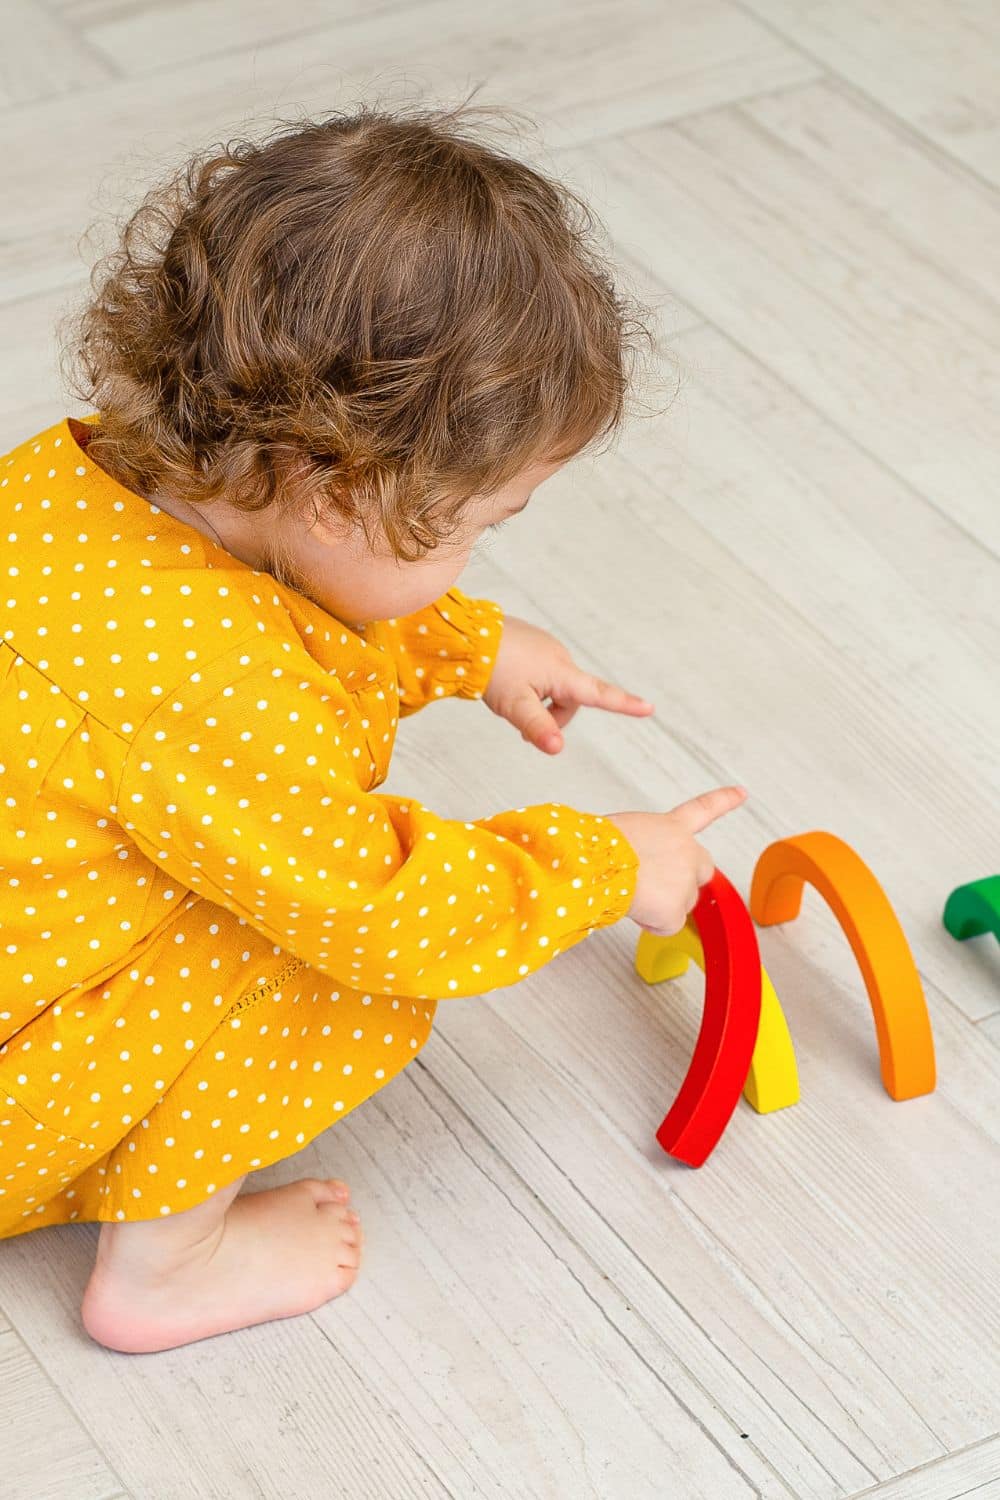 10 Activities to Improve Your Toddler's Development At Home